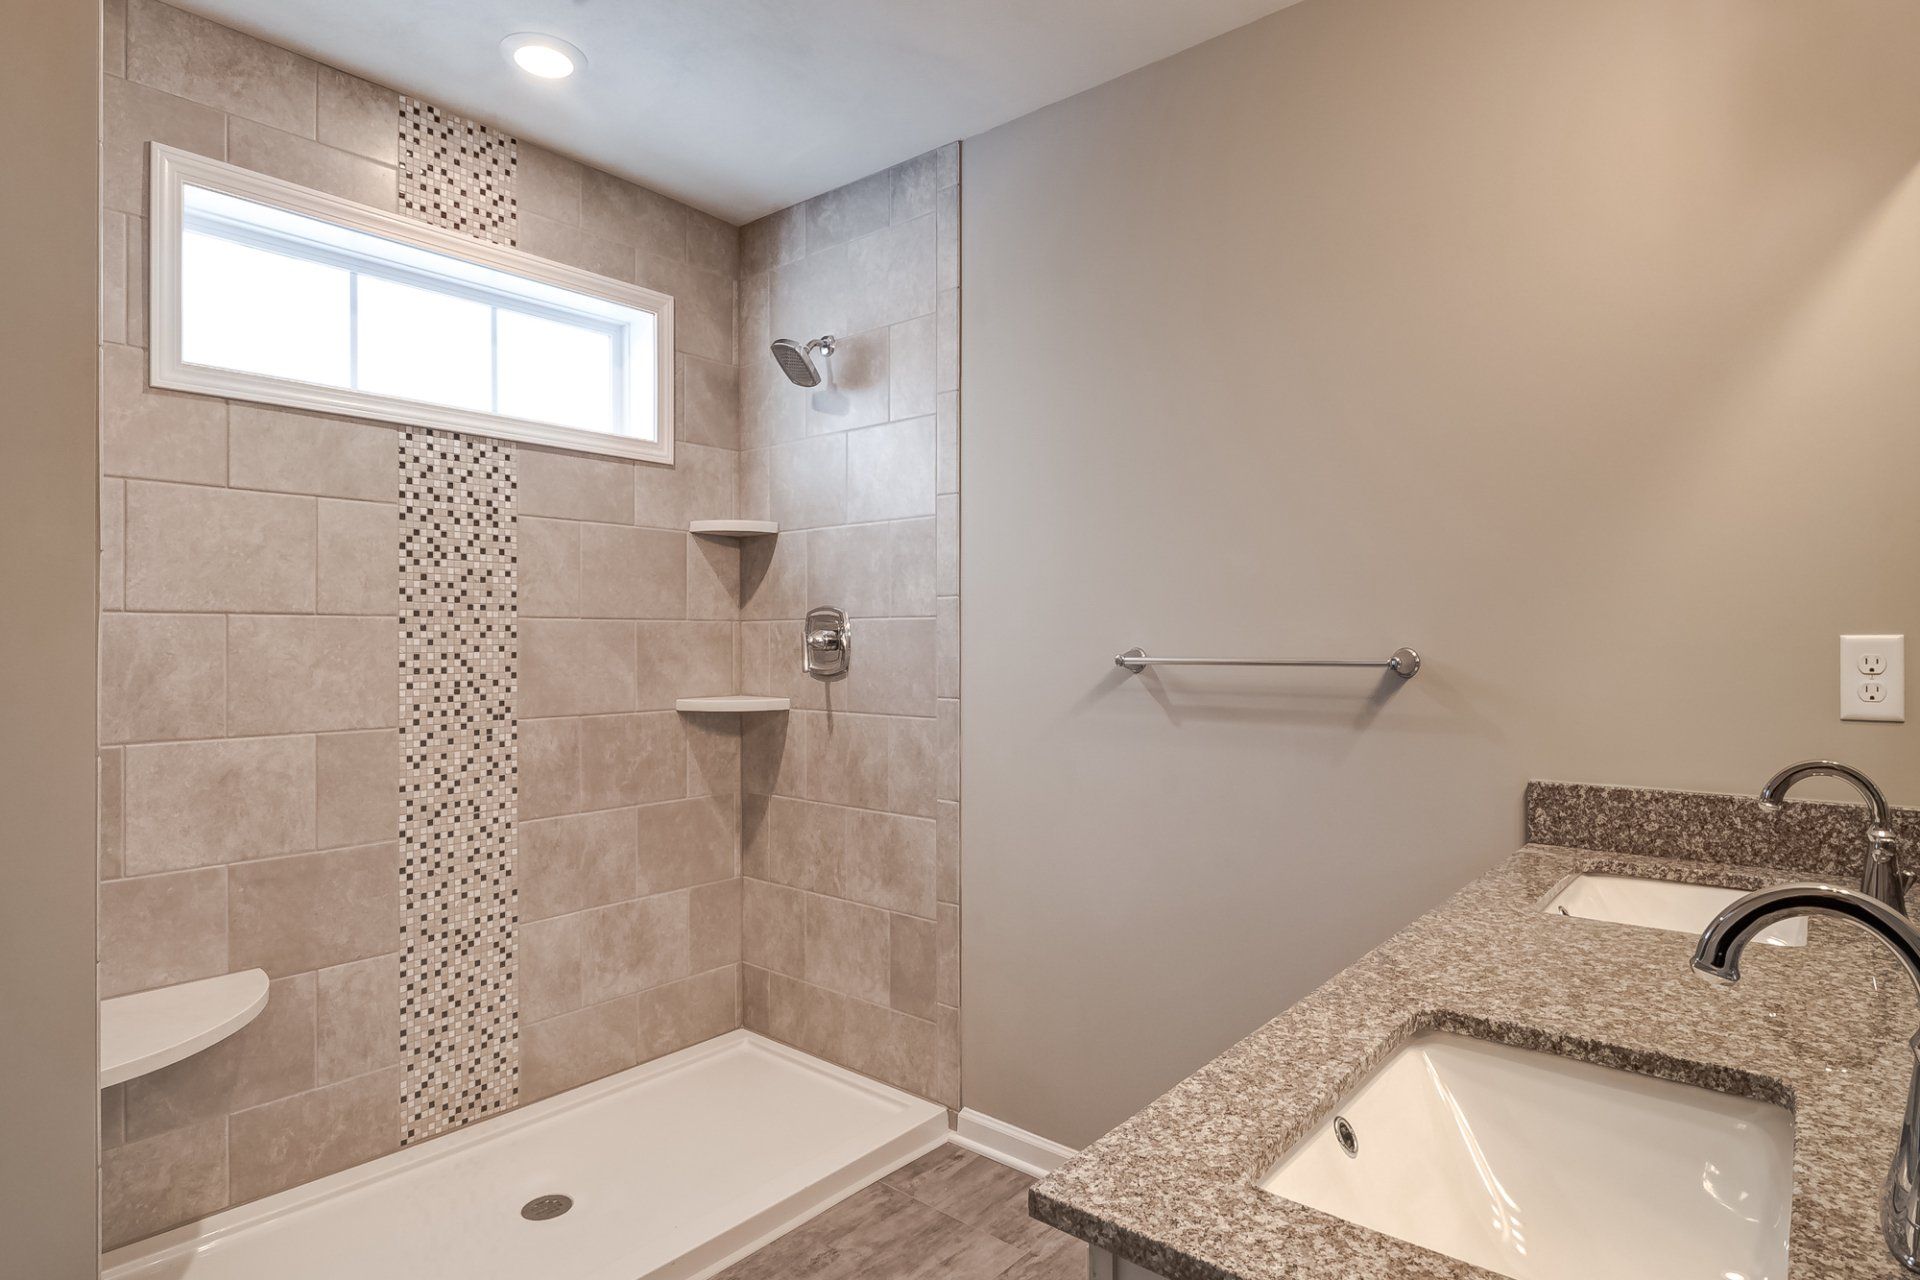 Walk-In Tile Shower with Built-In Bench and Shelves